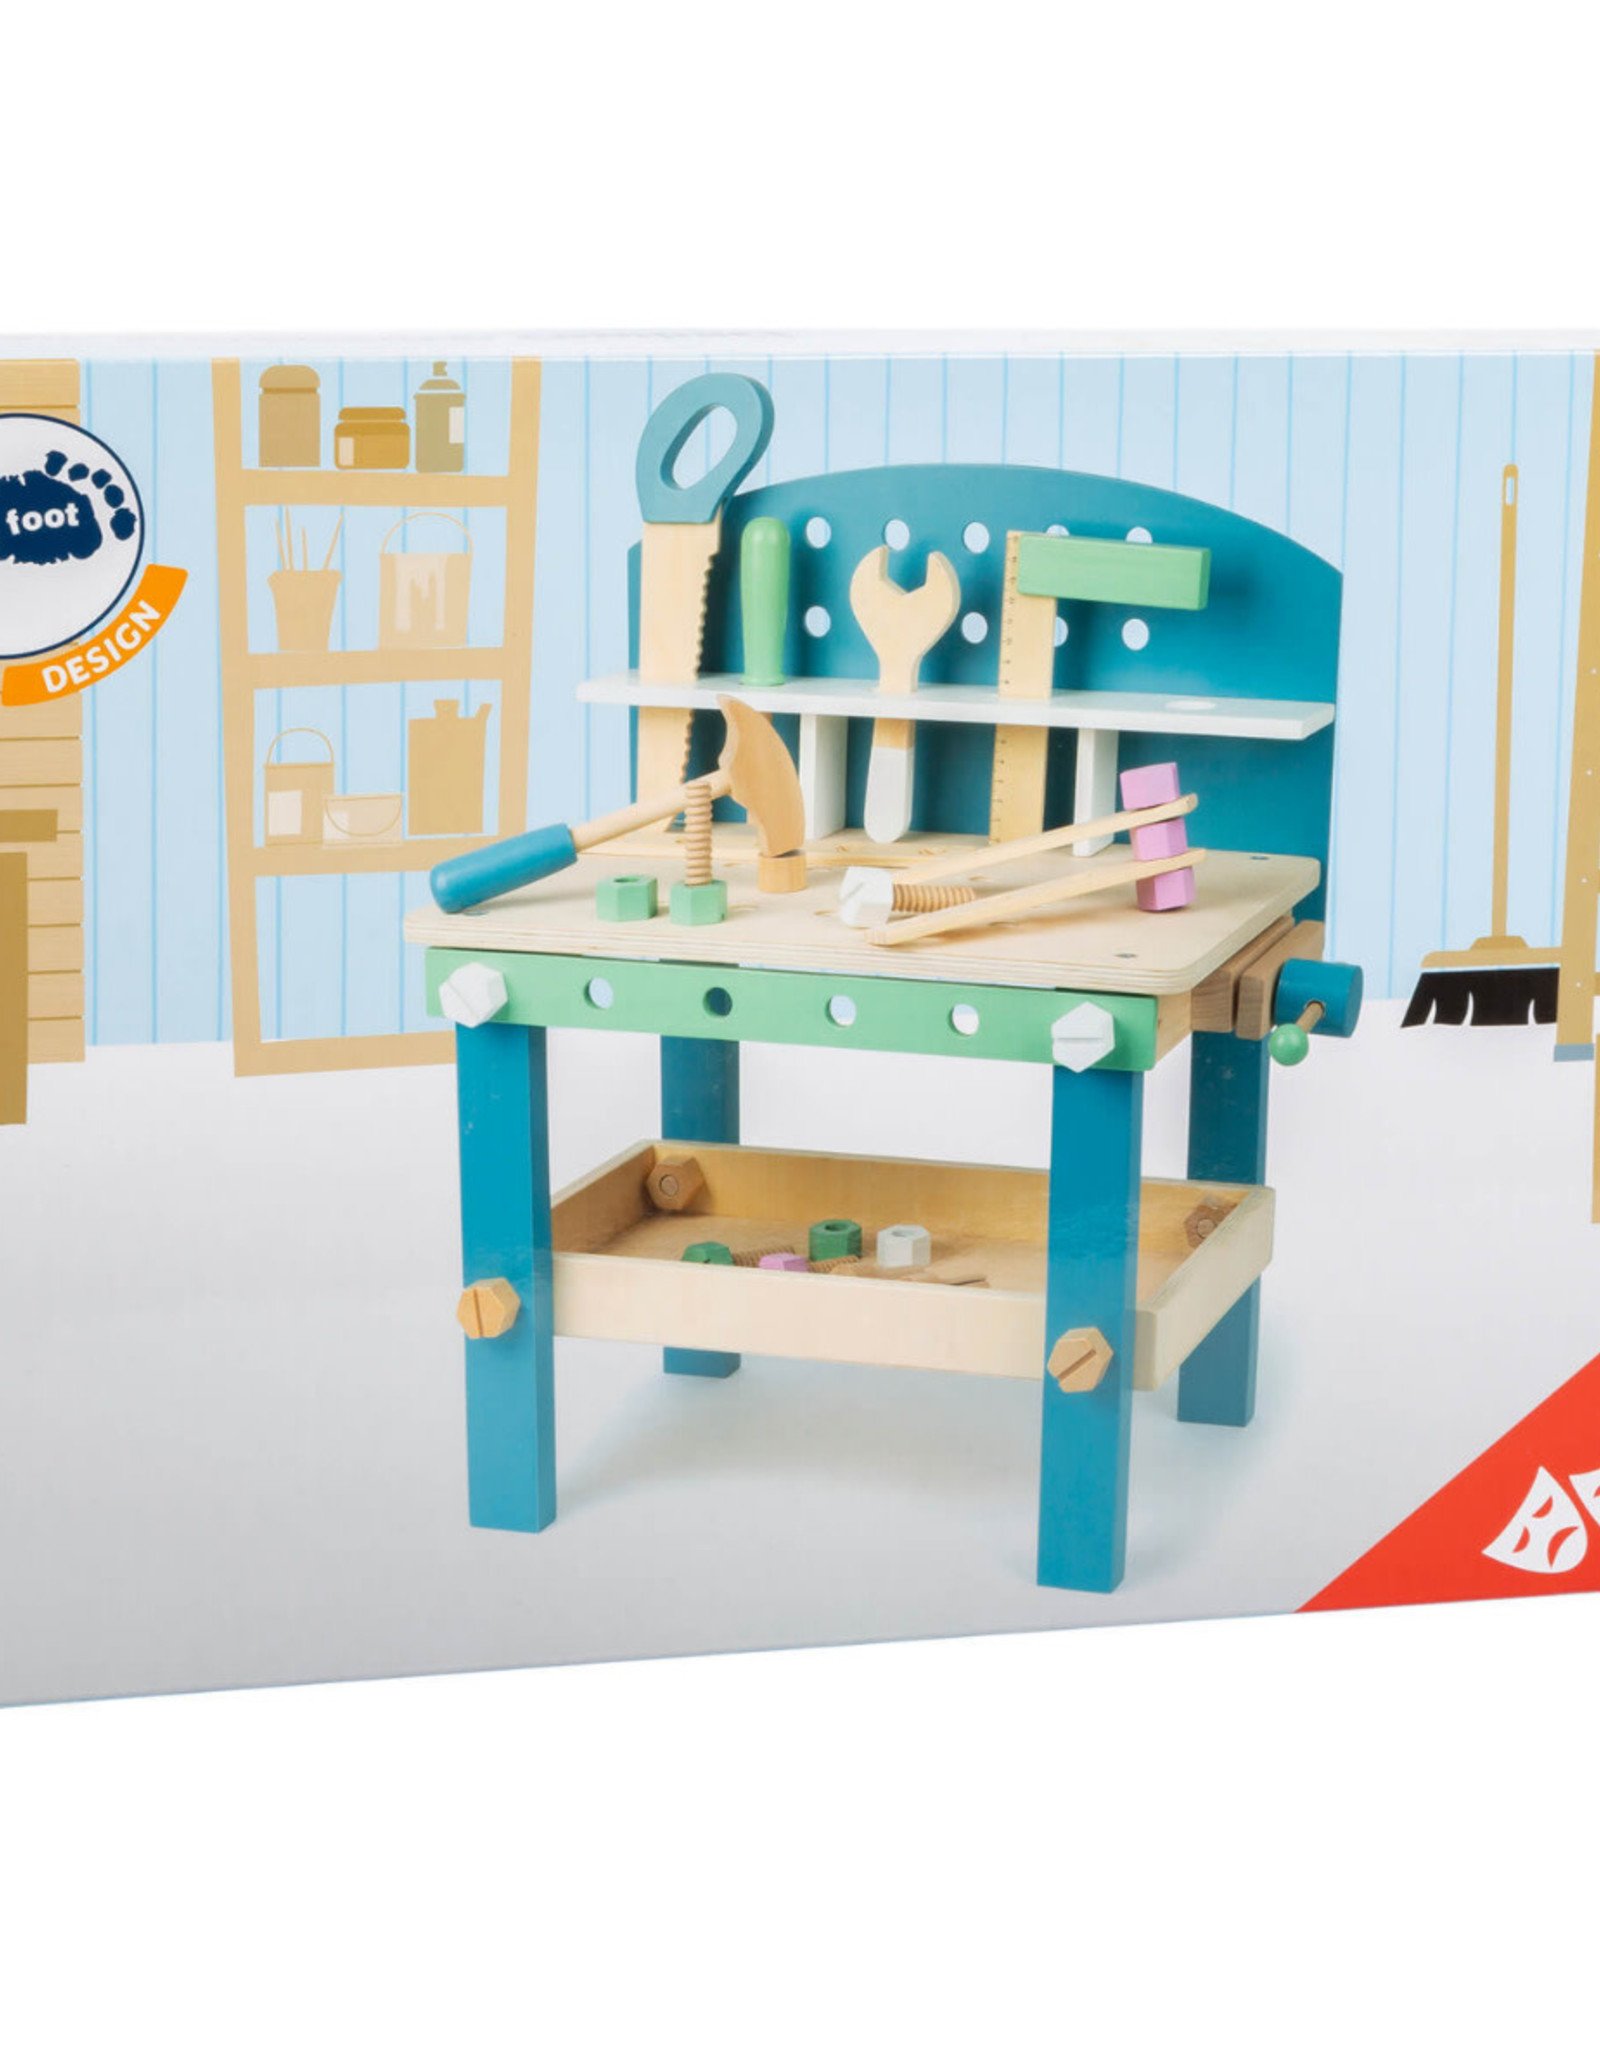 Small Foot Design Compact Workbench with Accessories Nordic Theme